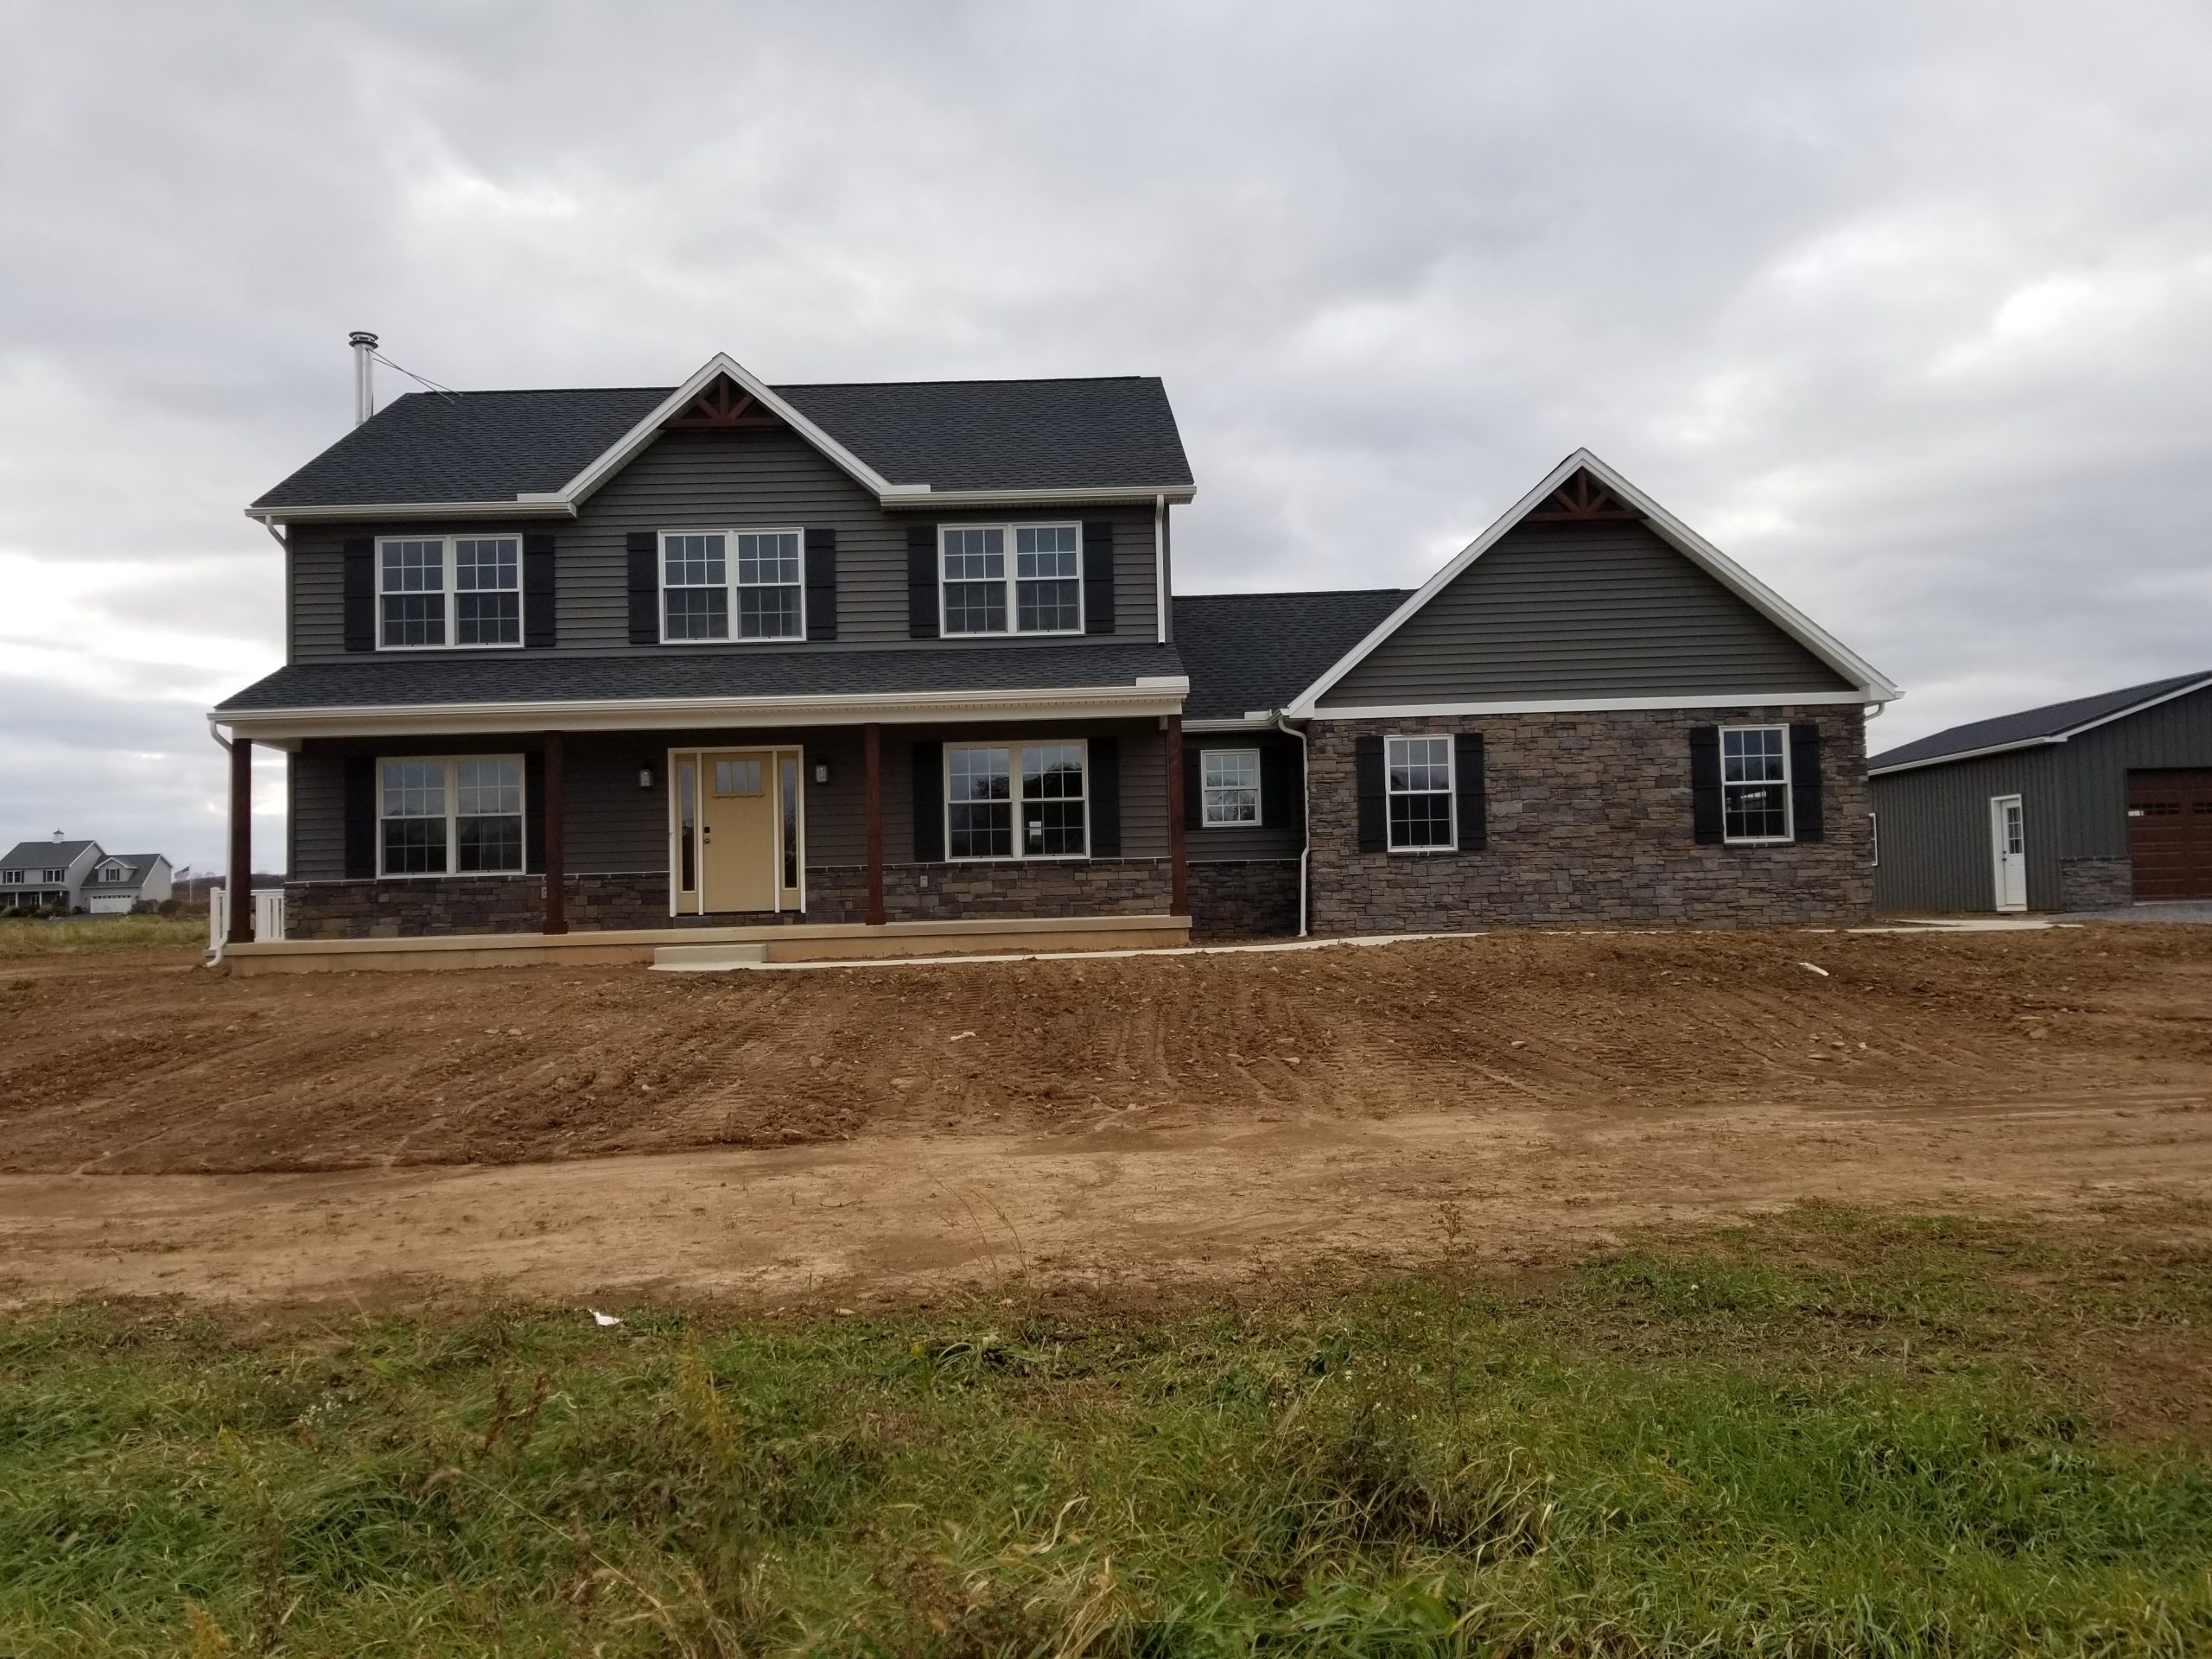 Front exterior view of a new home with dark gray siding, black shutters, stone siding, white trim, an attached garage, and black roofing.